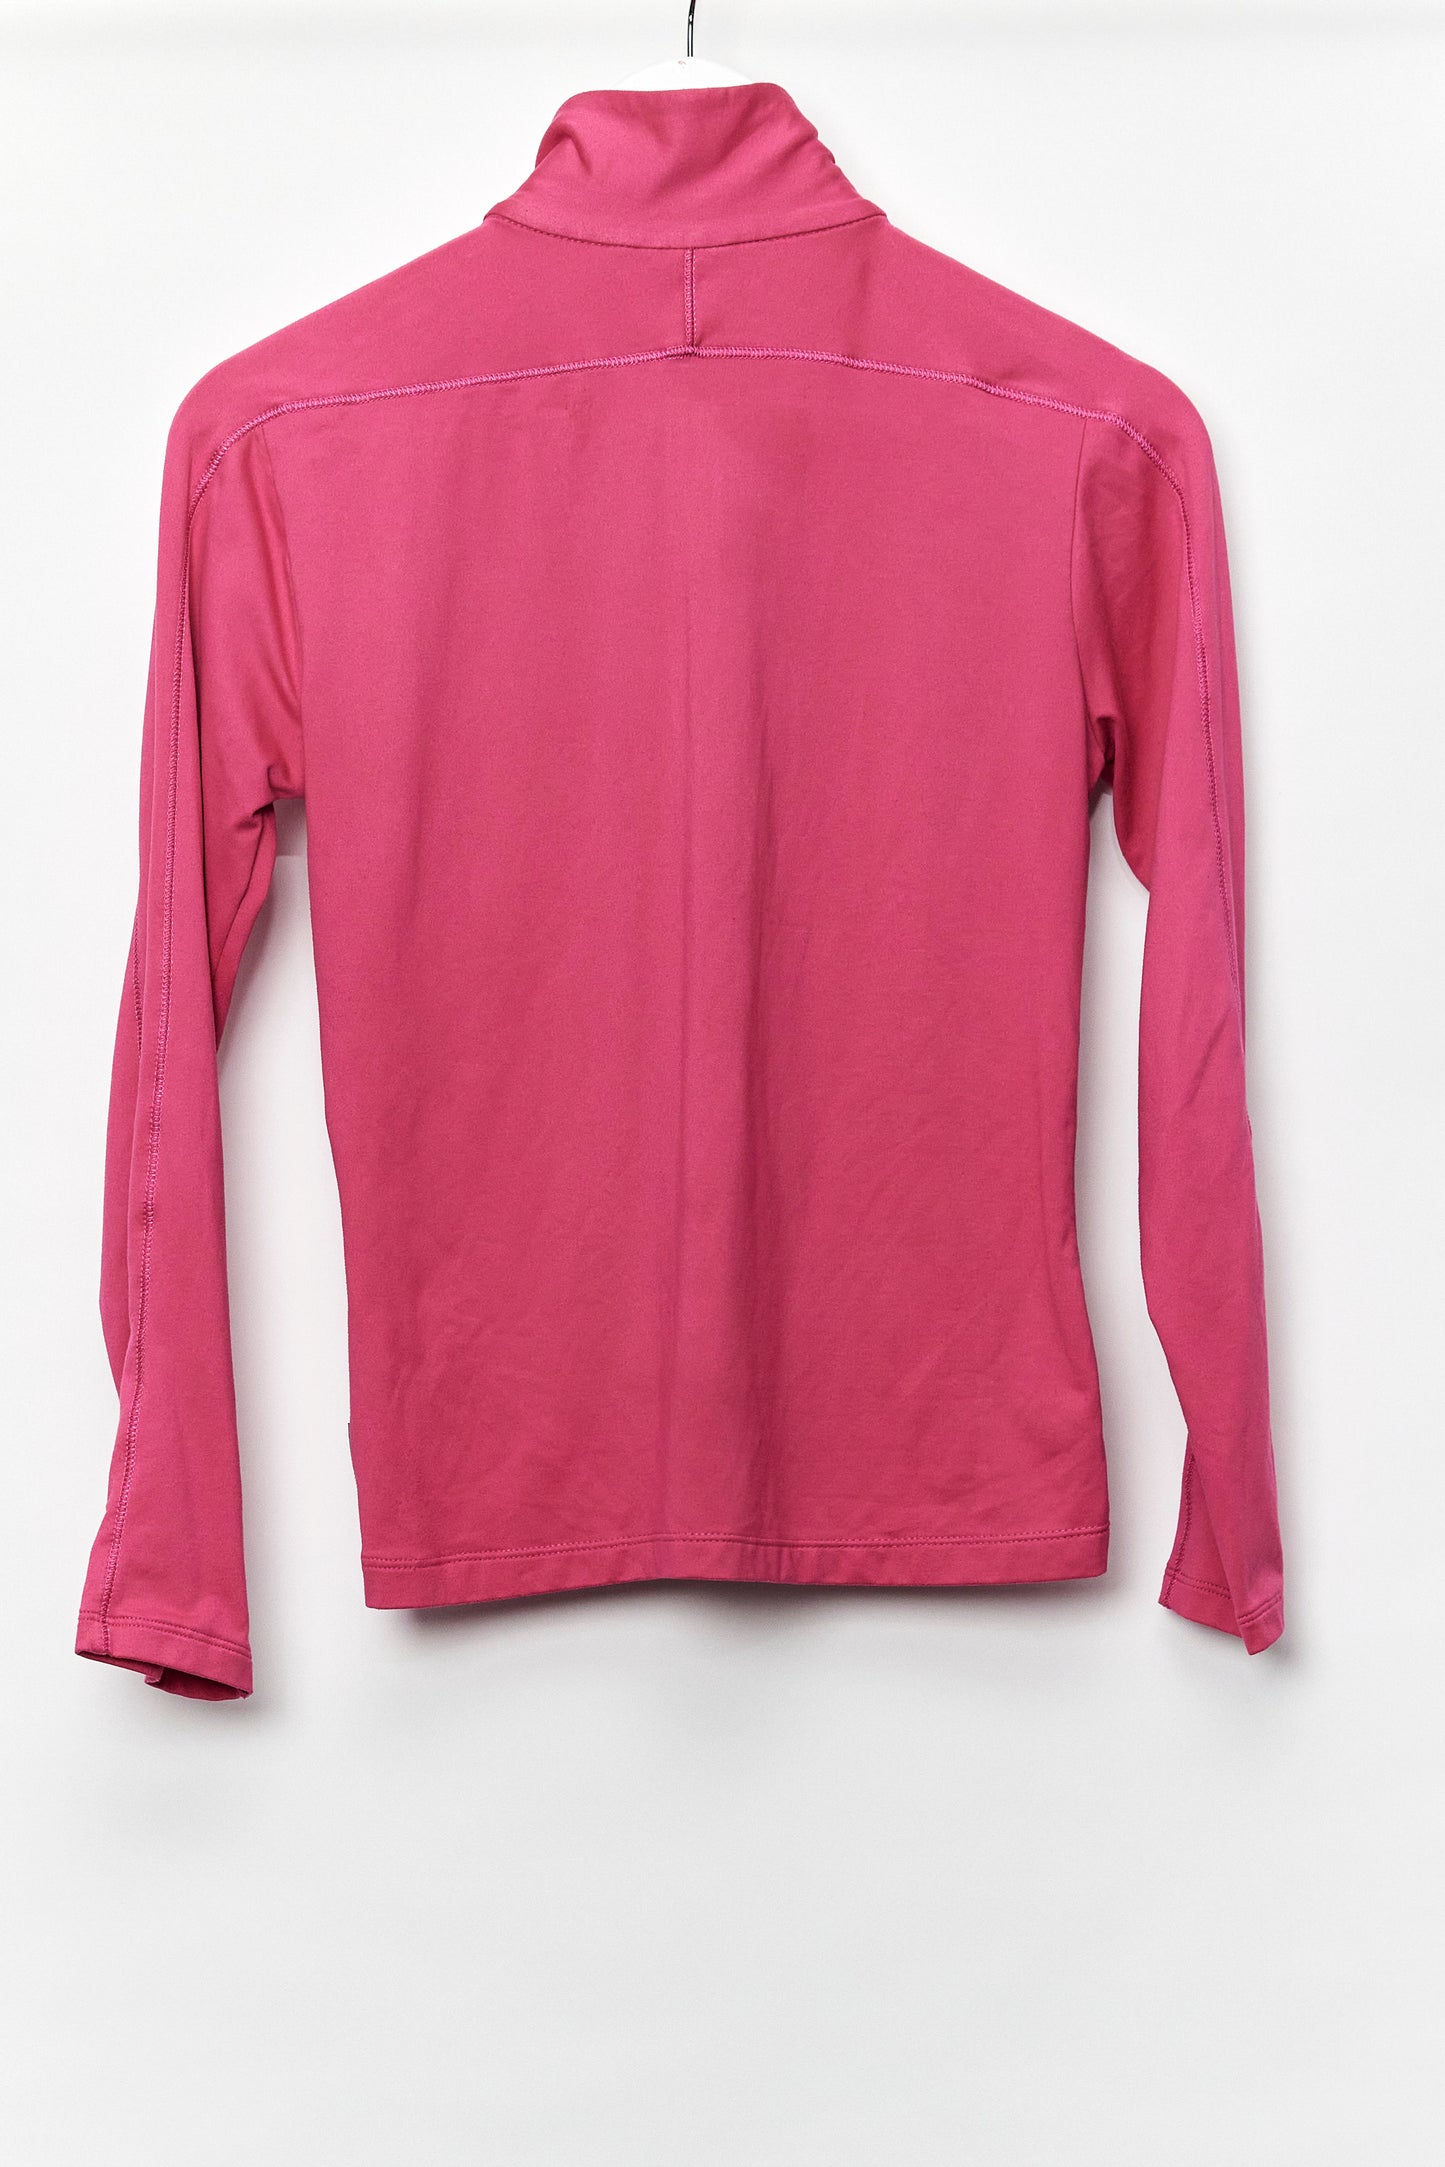 Womens Pink Sport Top Size Extra Small